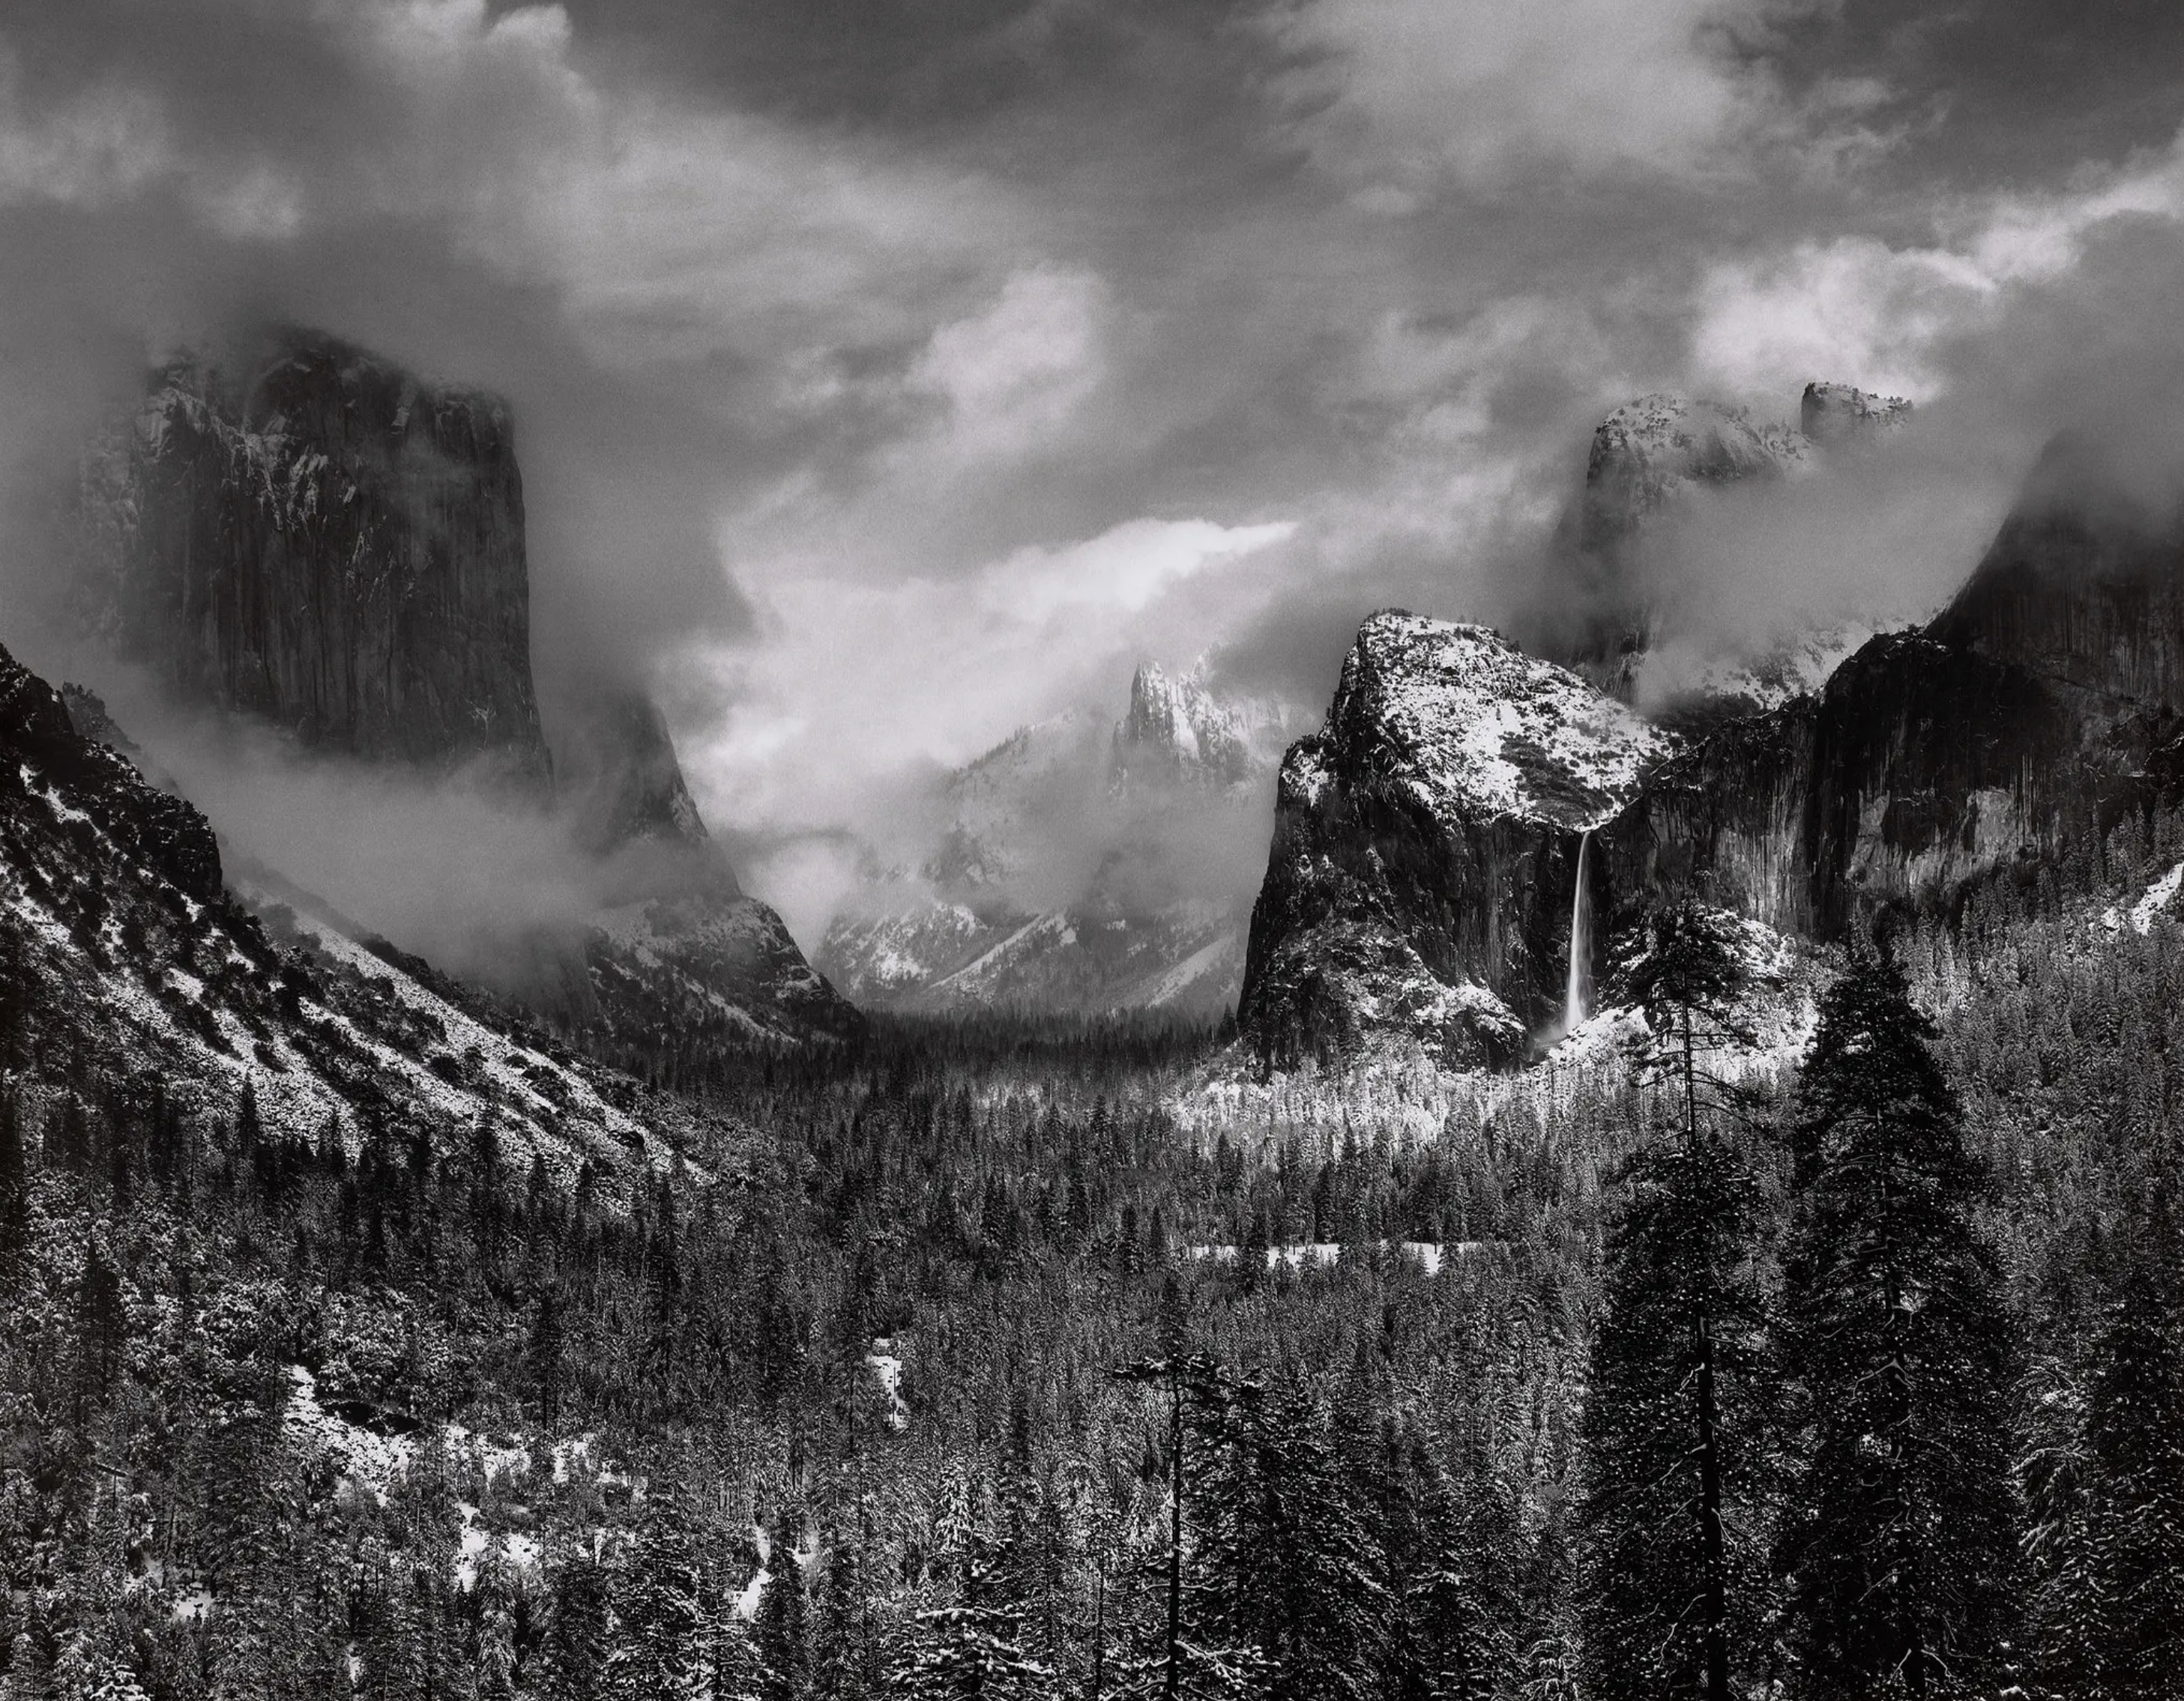 A black-and-white photograph of Yosemite Valley taken by Ansel Adams